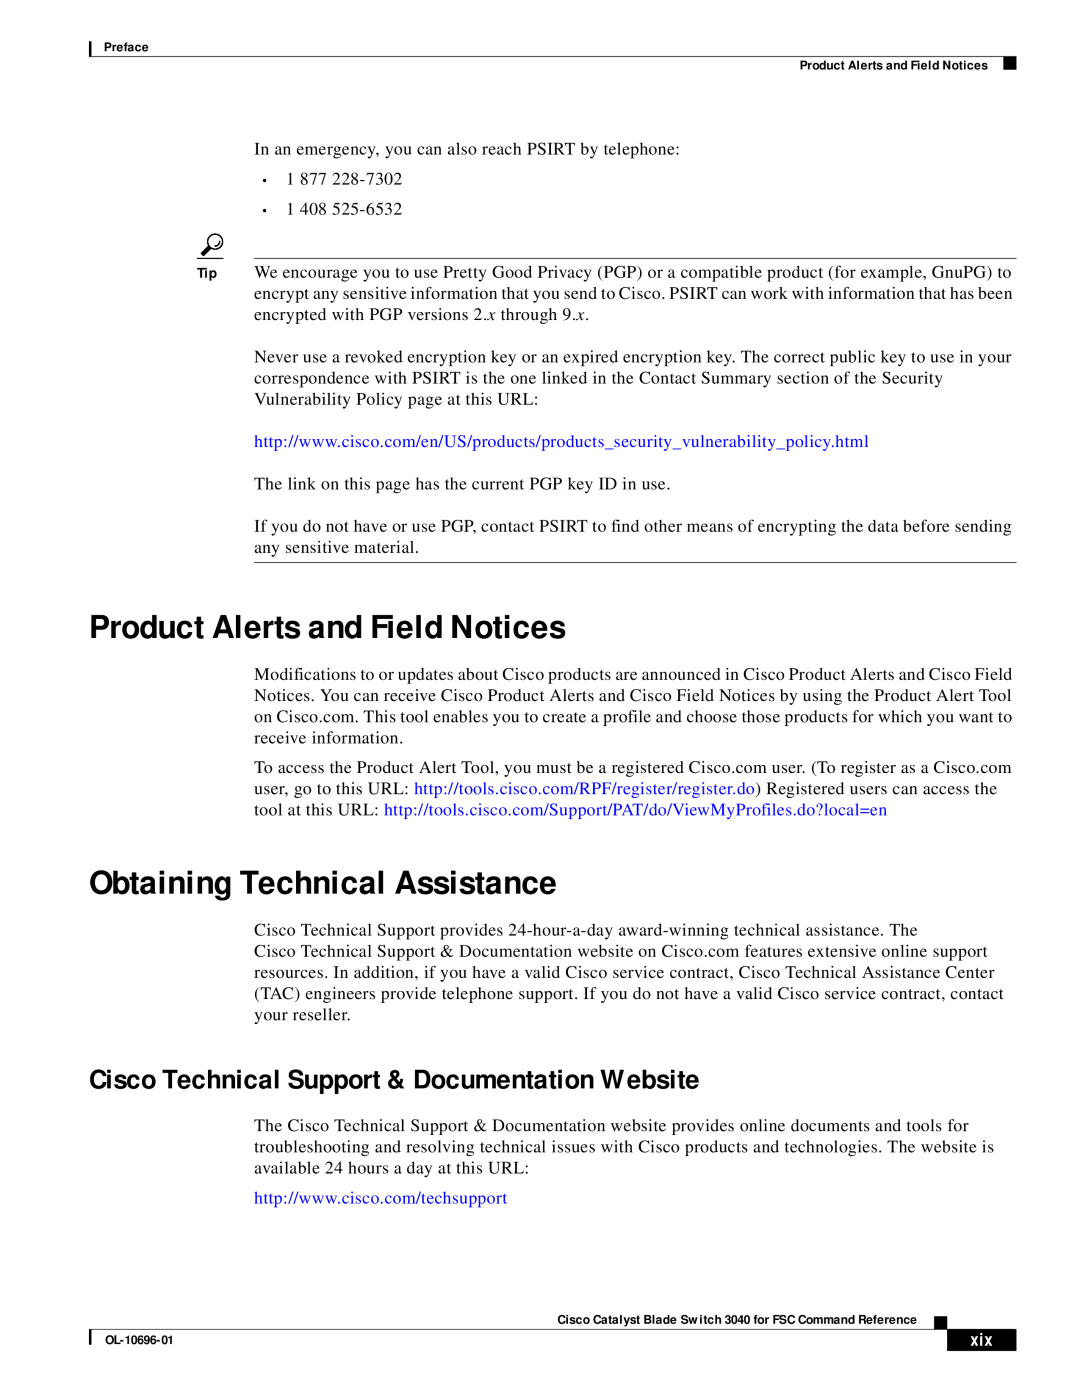 Cisco Systems 3040 manual Product Alerts and Field Notices, Obtaining Technical Assistance 